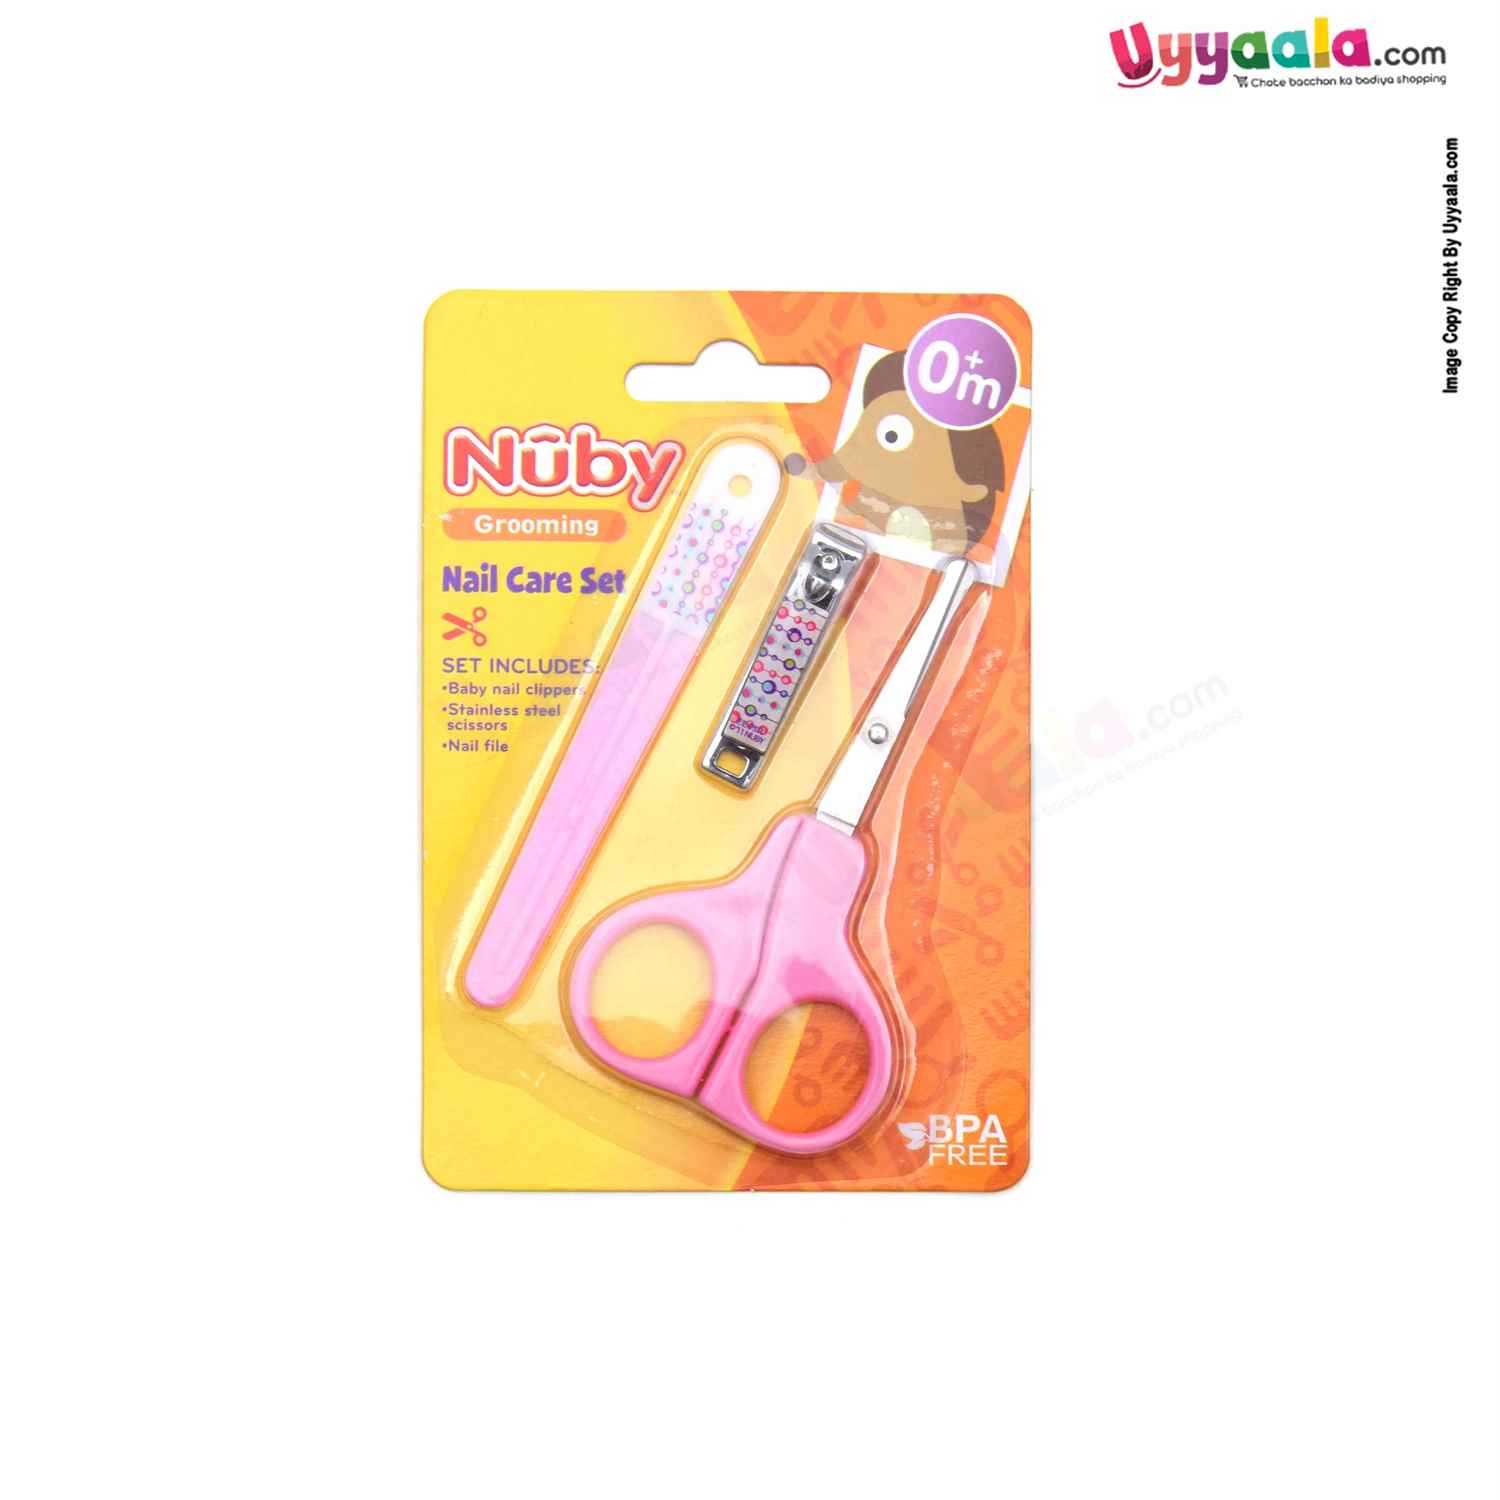 NUBY Grooming set for baby nail care - 0+m